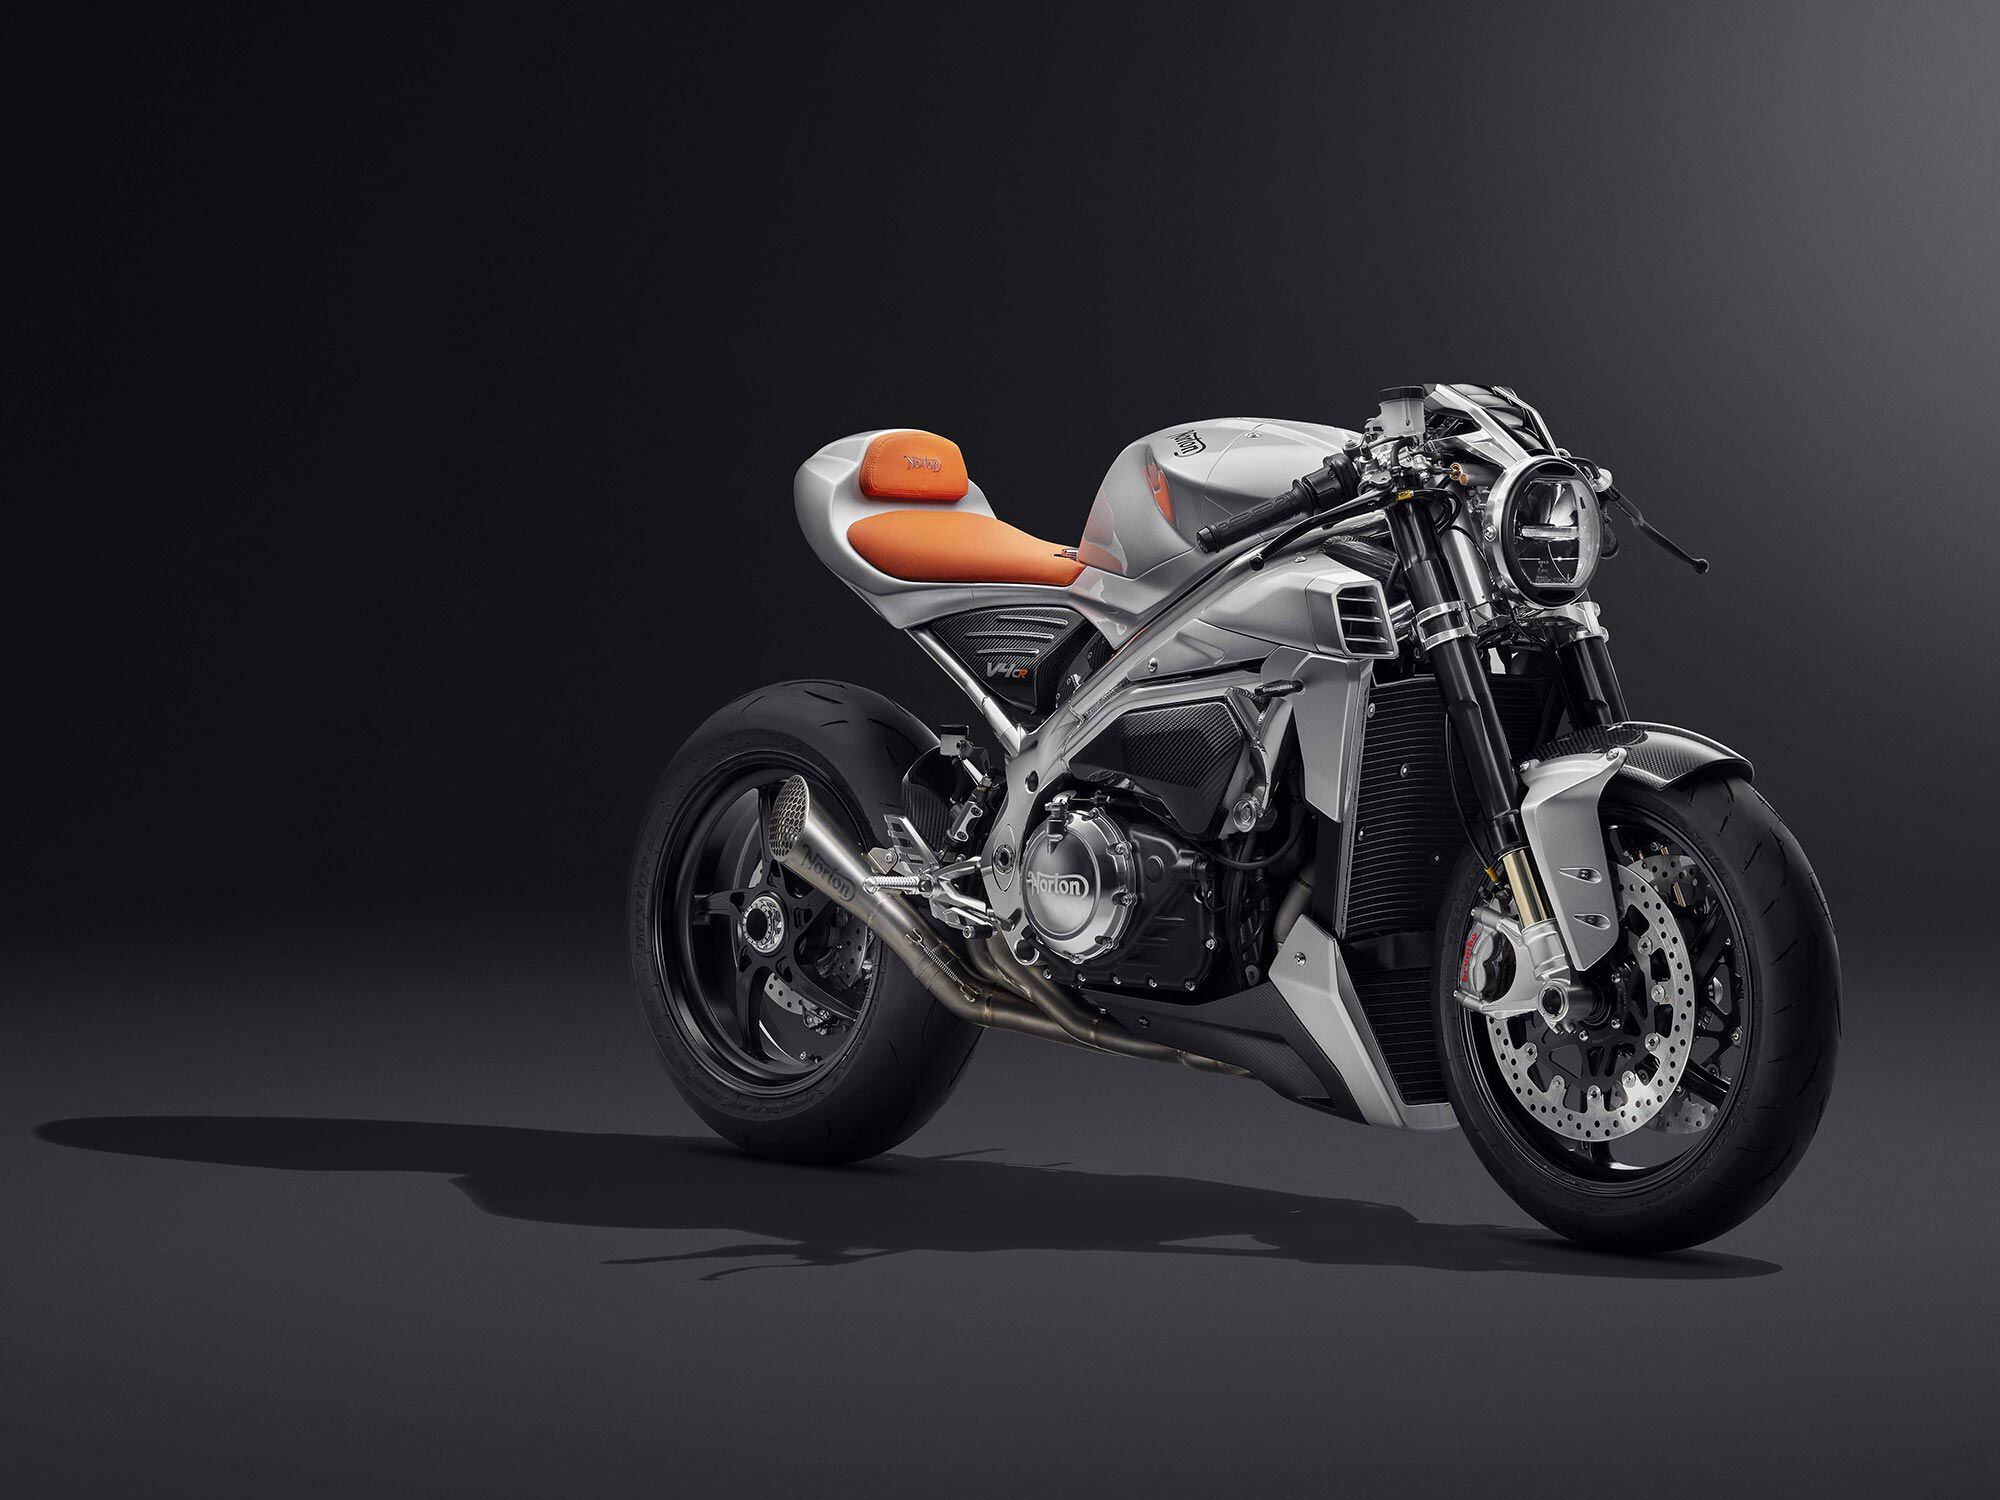 Norton Motorcycle has reworked the 1,200cc V4SV superbike into this stripped-down V4CR.